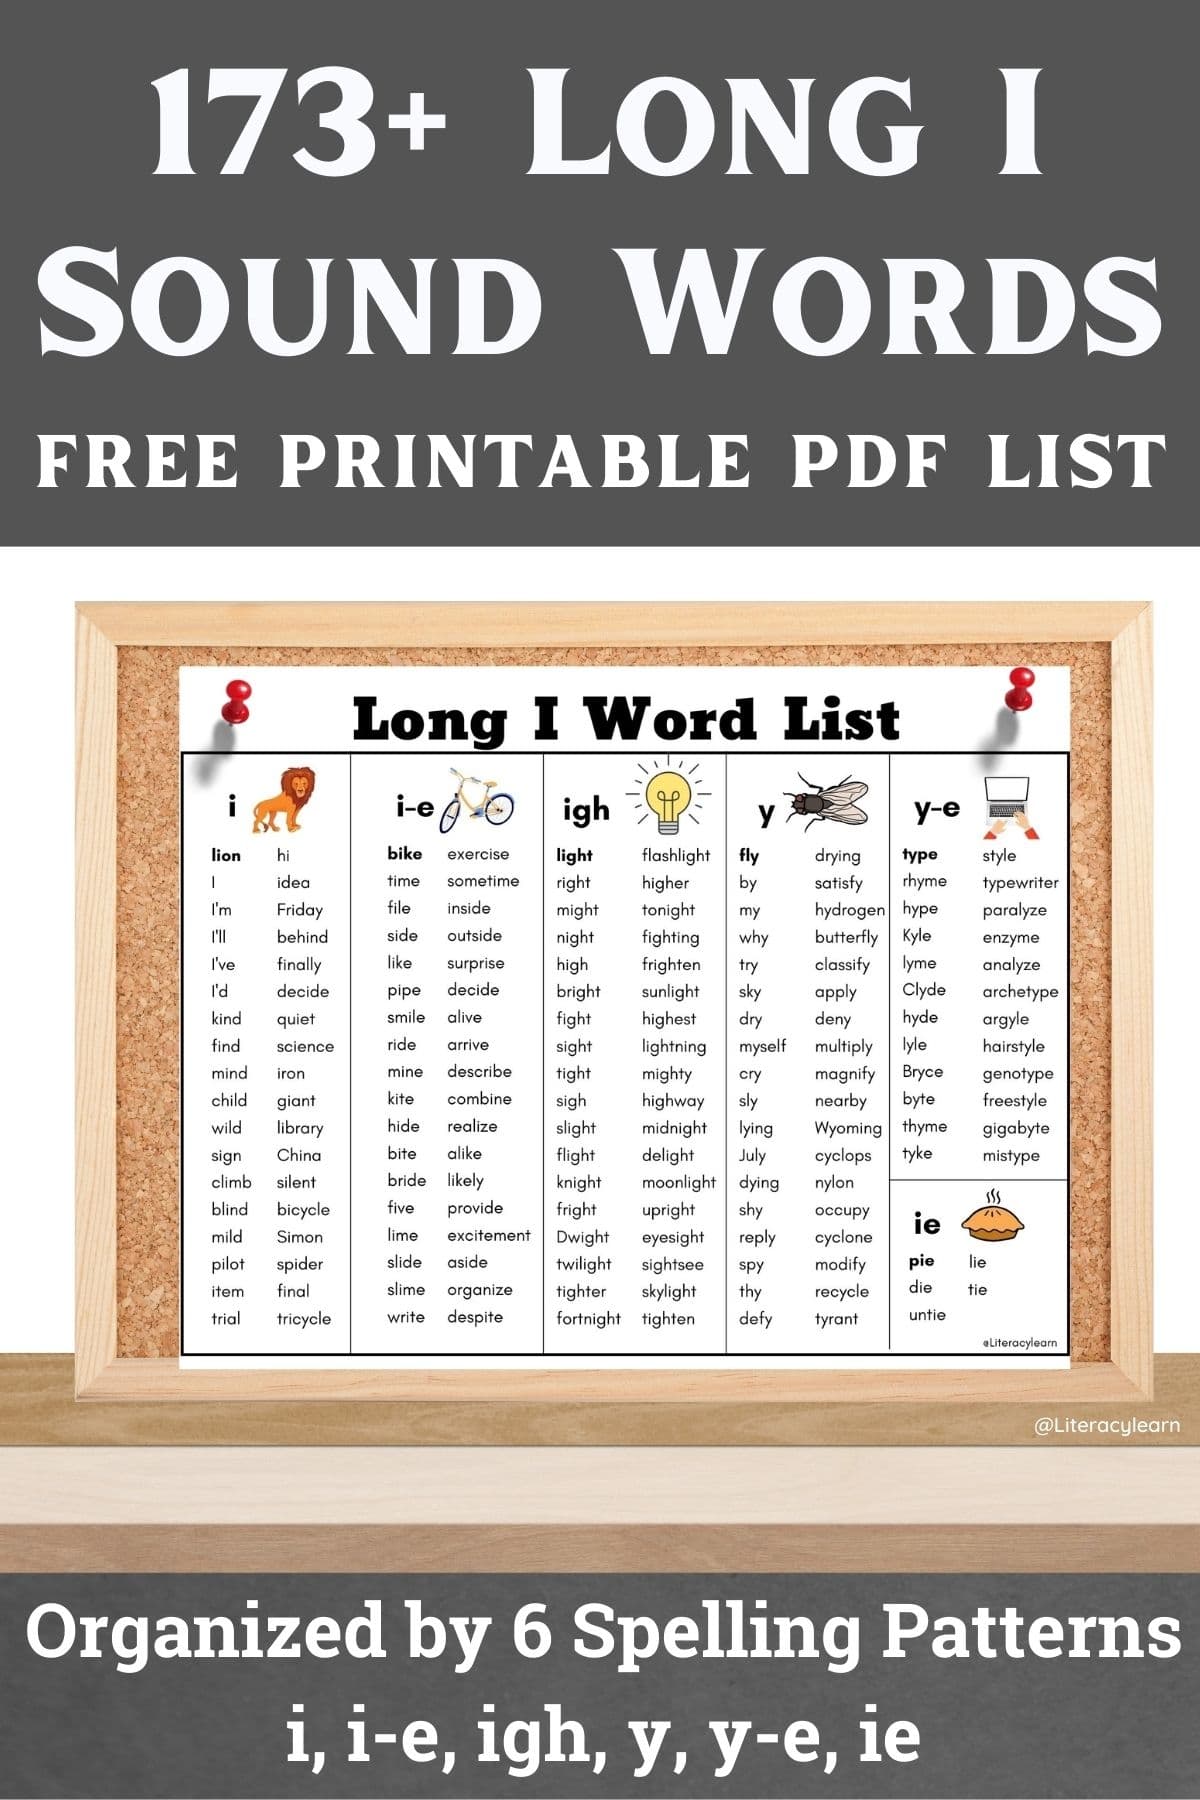 Corkboard image with list pinned to it. Text saying "173+ Long I Sound Words."